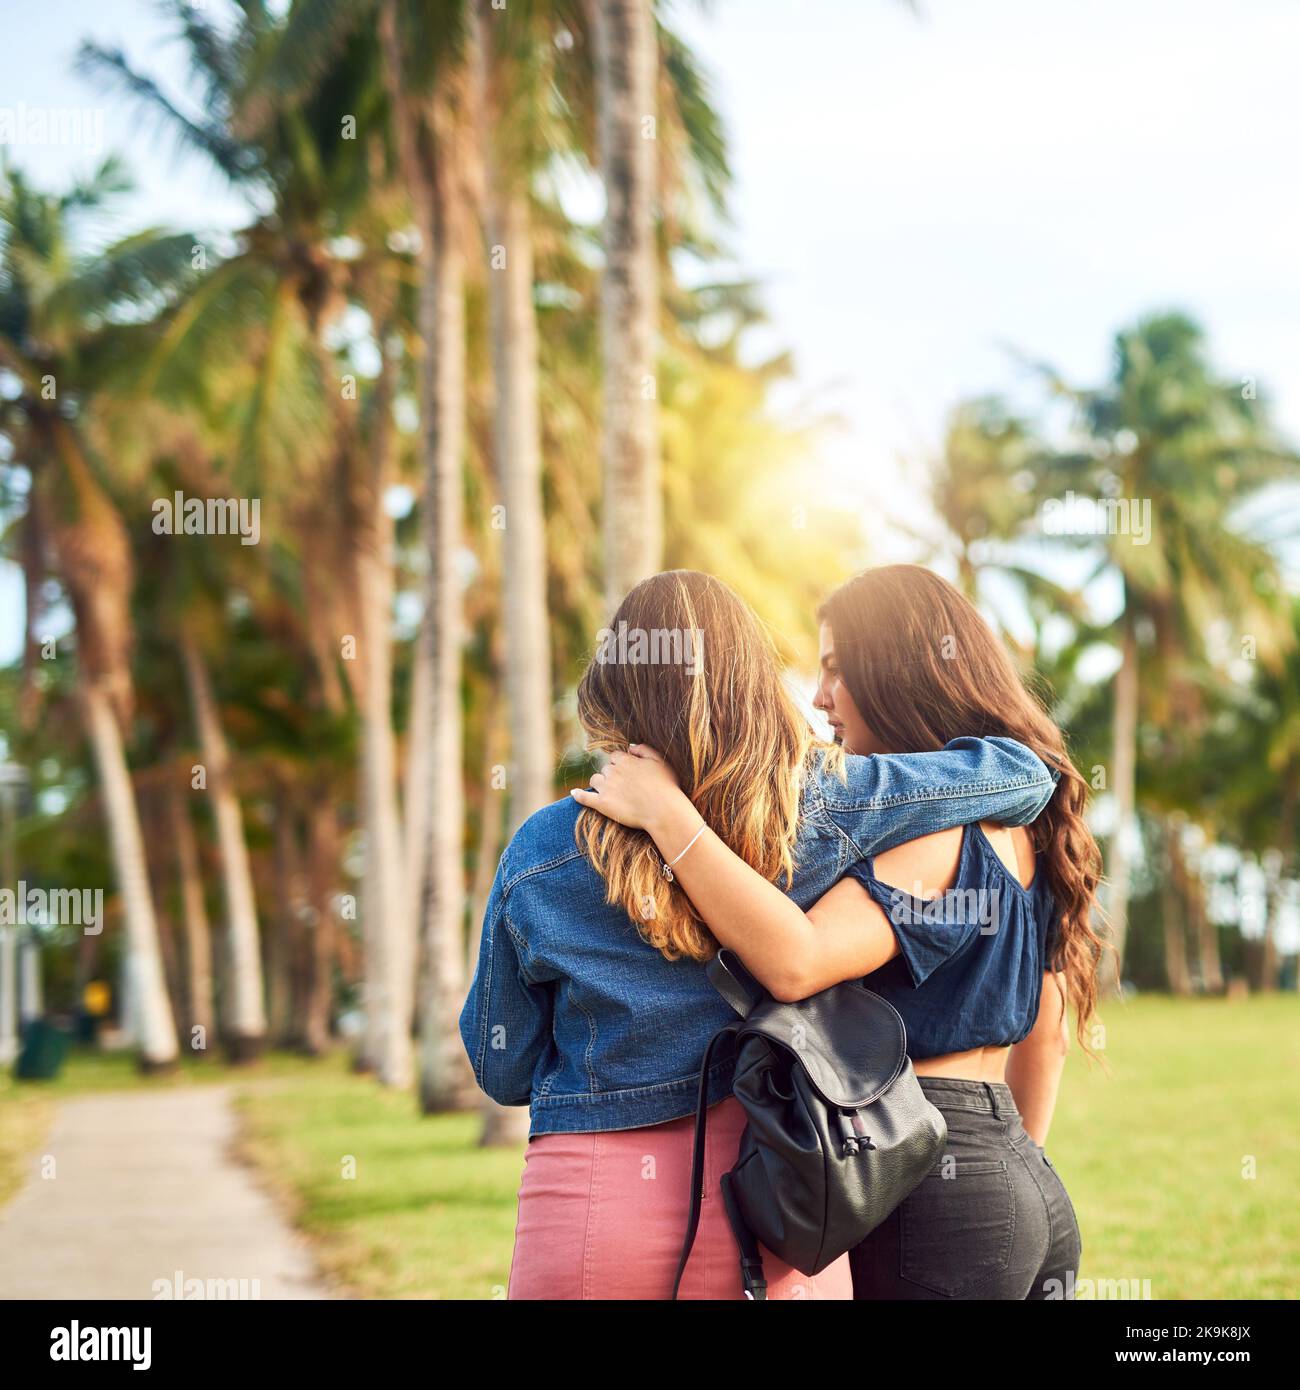 Off they go to wander together. Rearview shot of two unrecognizable female best friends hanging out in a public park. Stock Photo